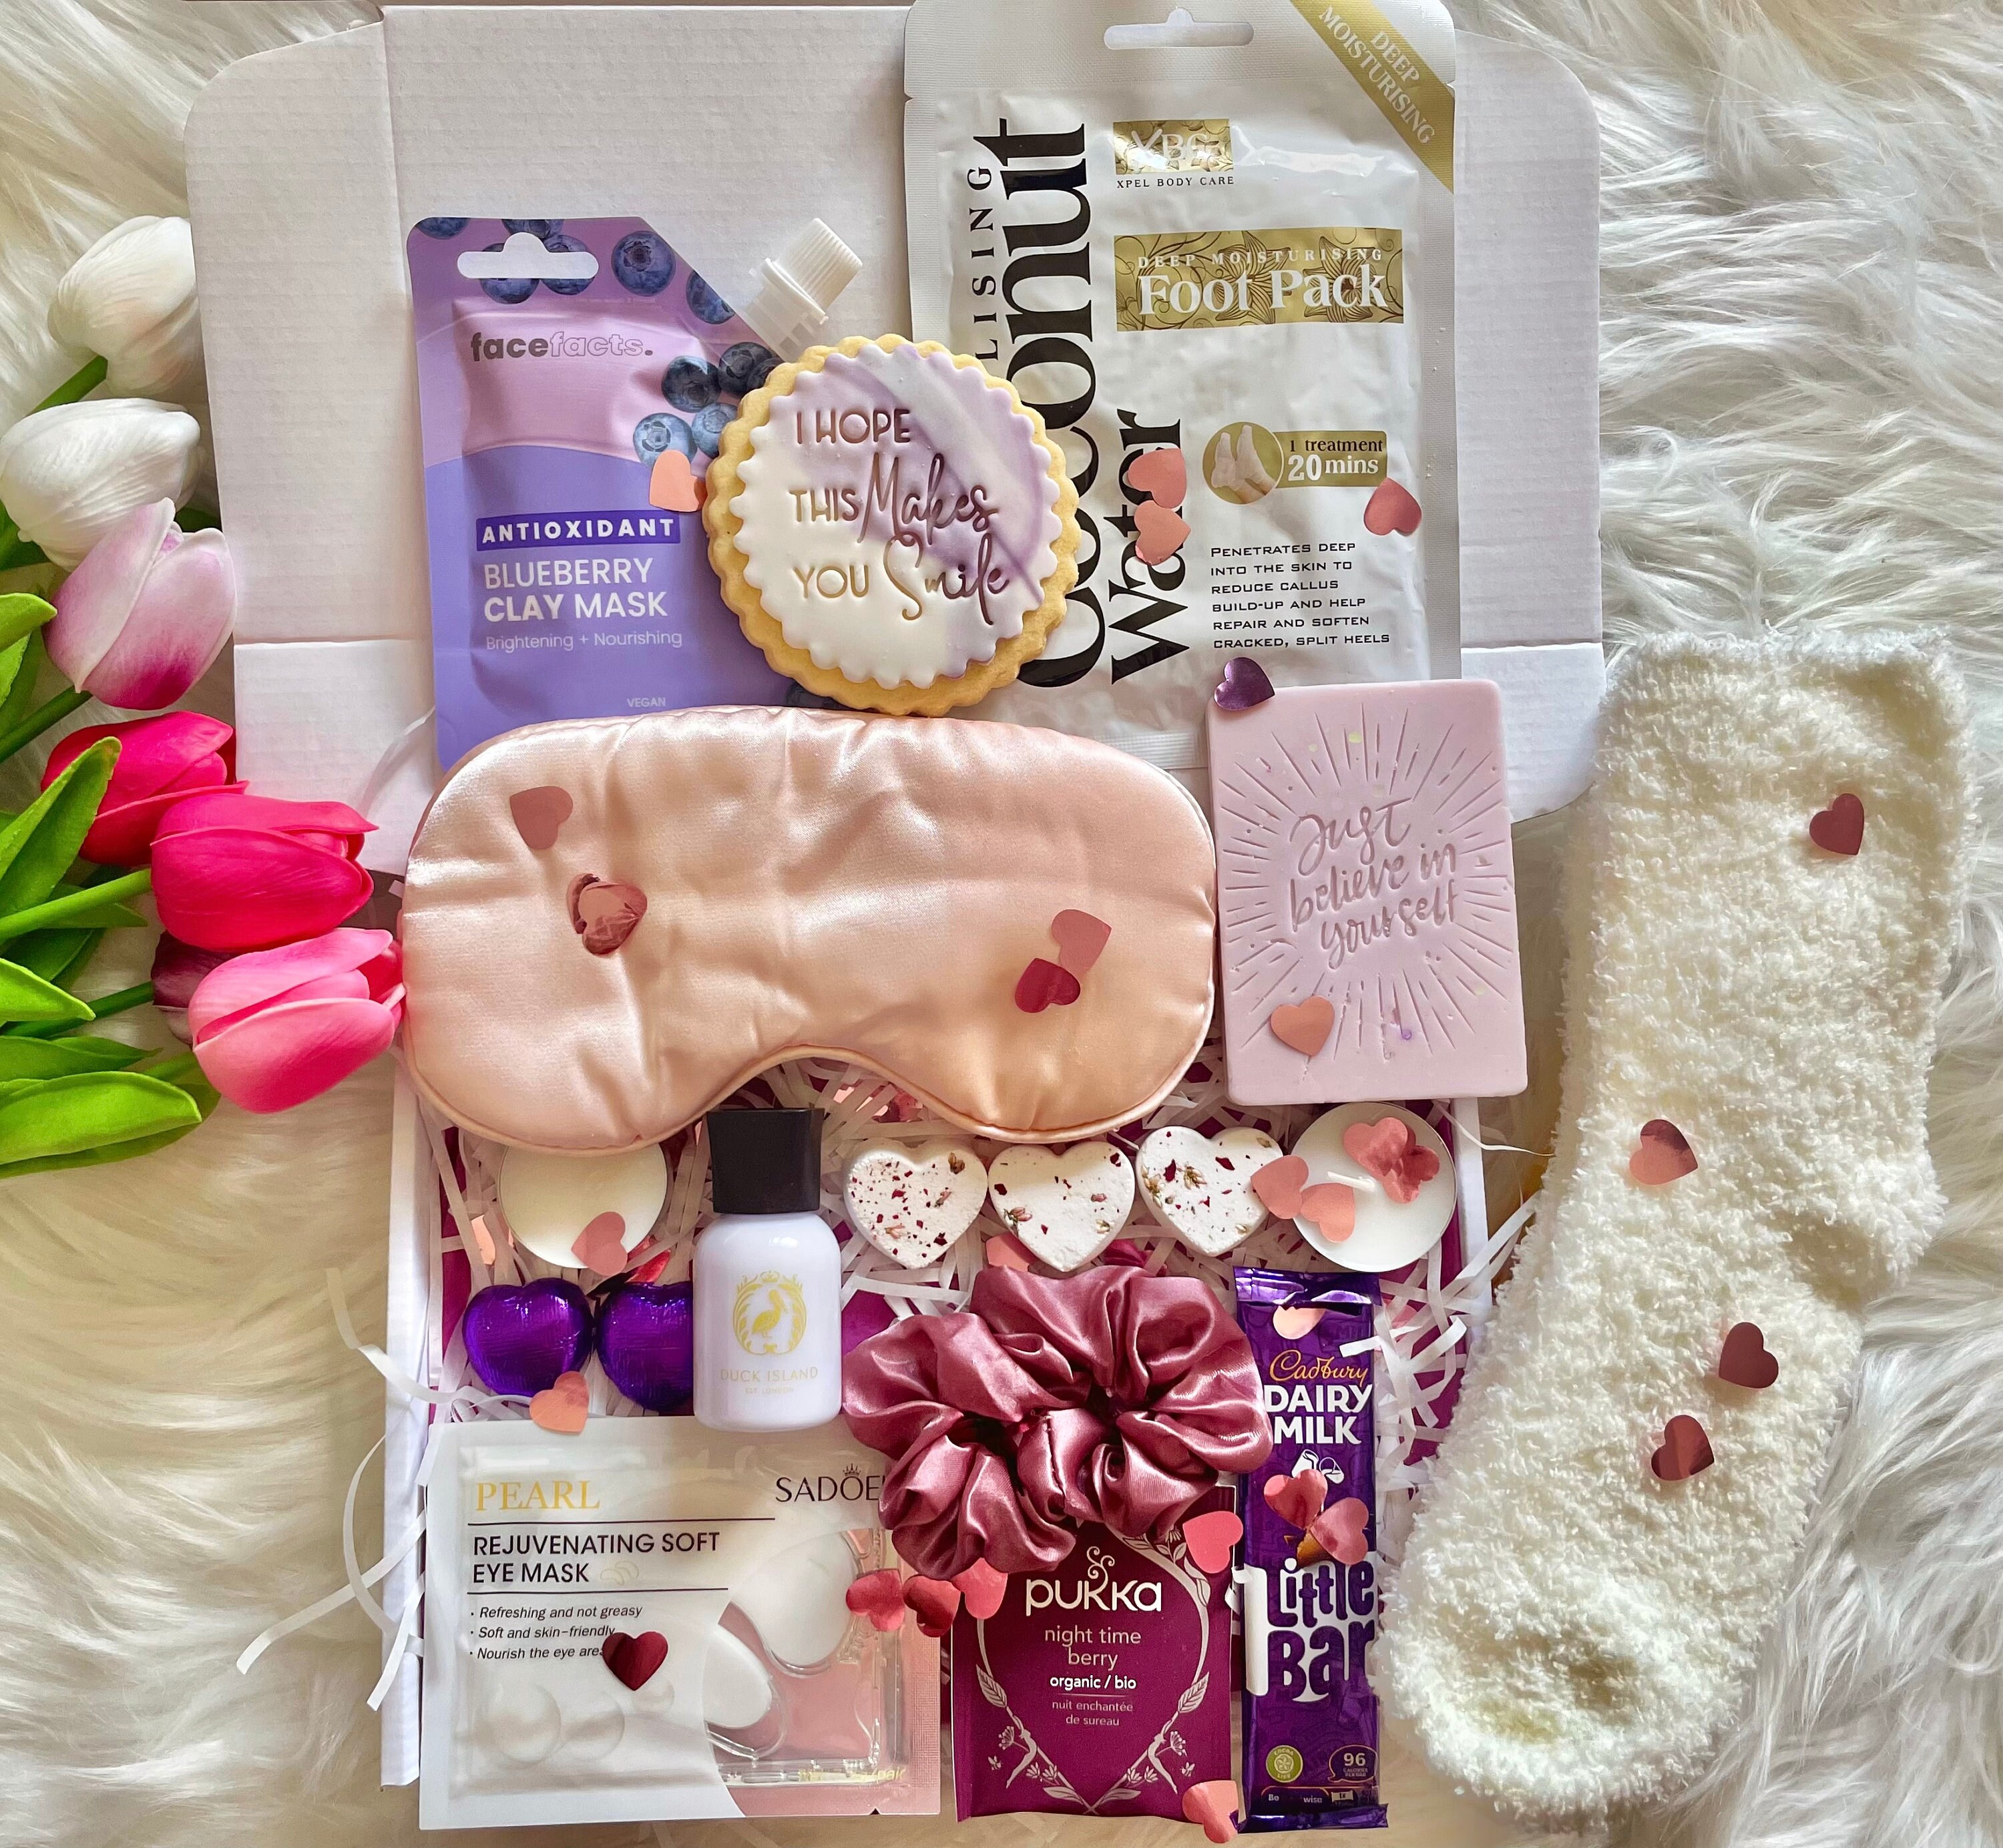 BIRTHDAY Pink Gift for Women, Gifts for Her, Thinking of You, Get Well  Soon, Home Spa Day Kit, Self Care Package 